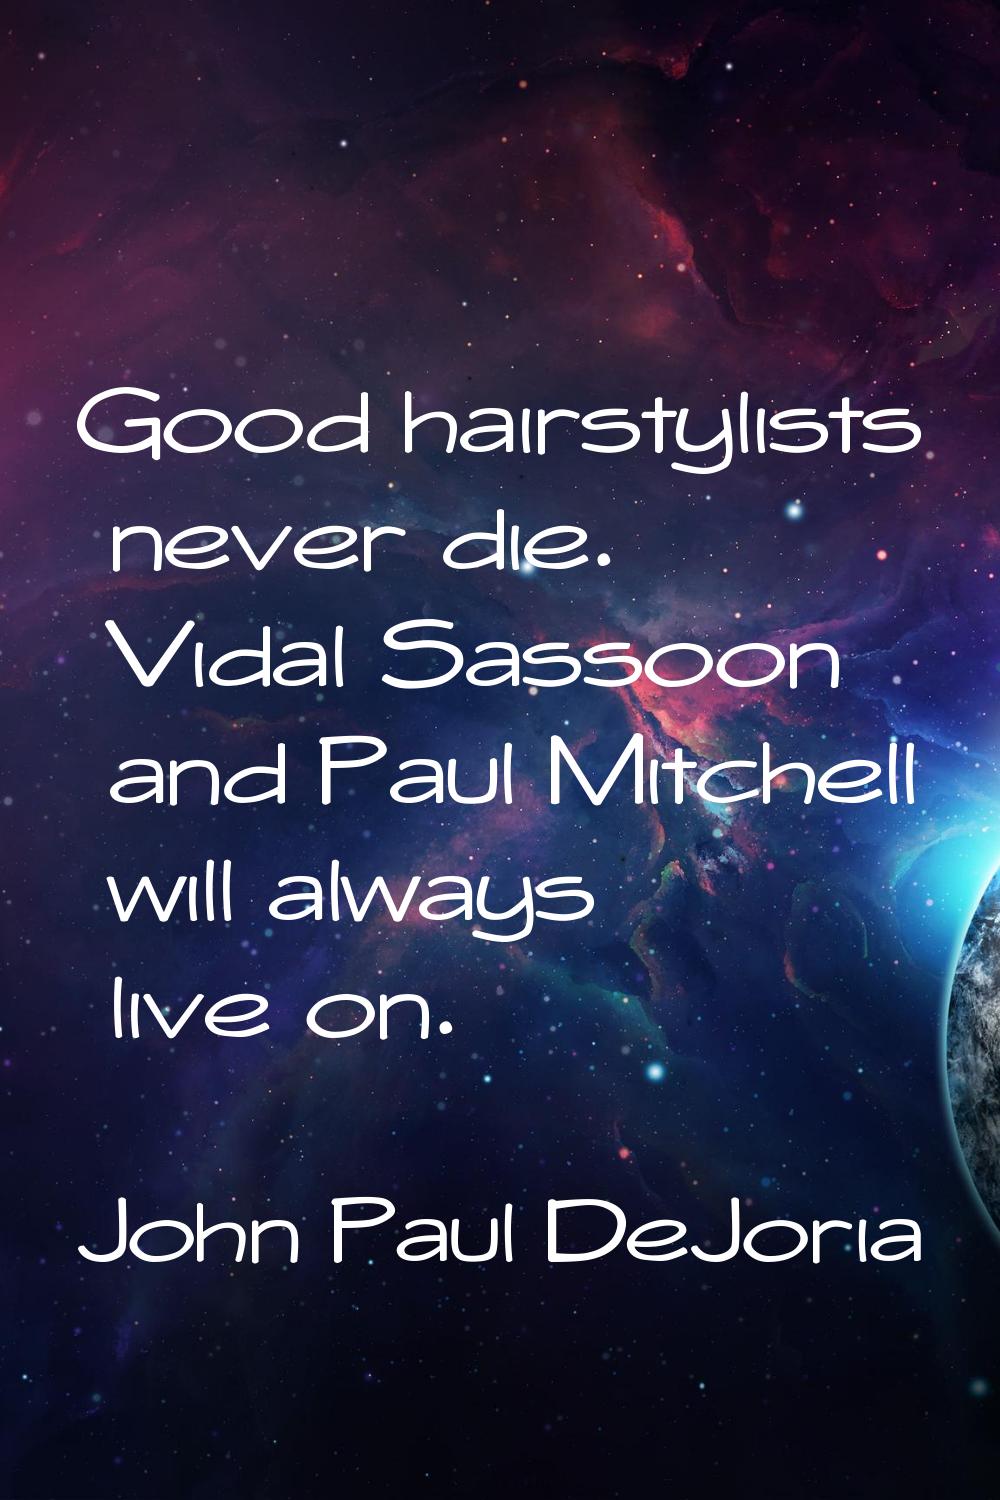 Good hairstylists never die. Vidal Sassoon and Paul Mitchell will always live on.